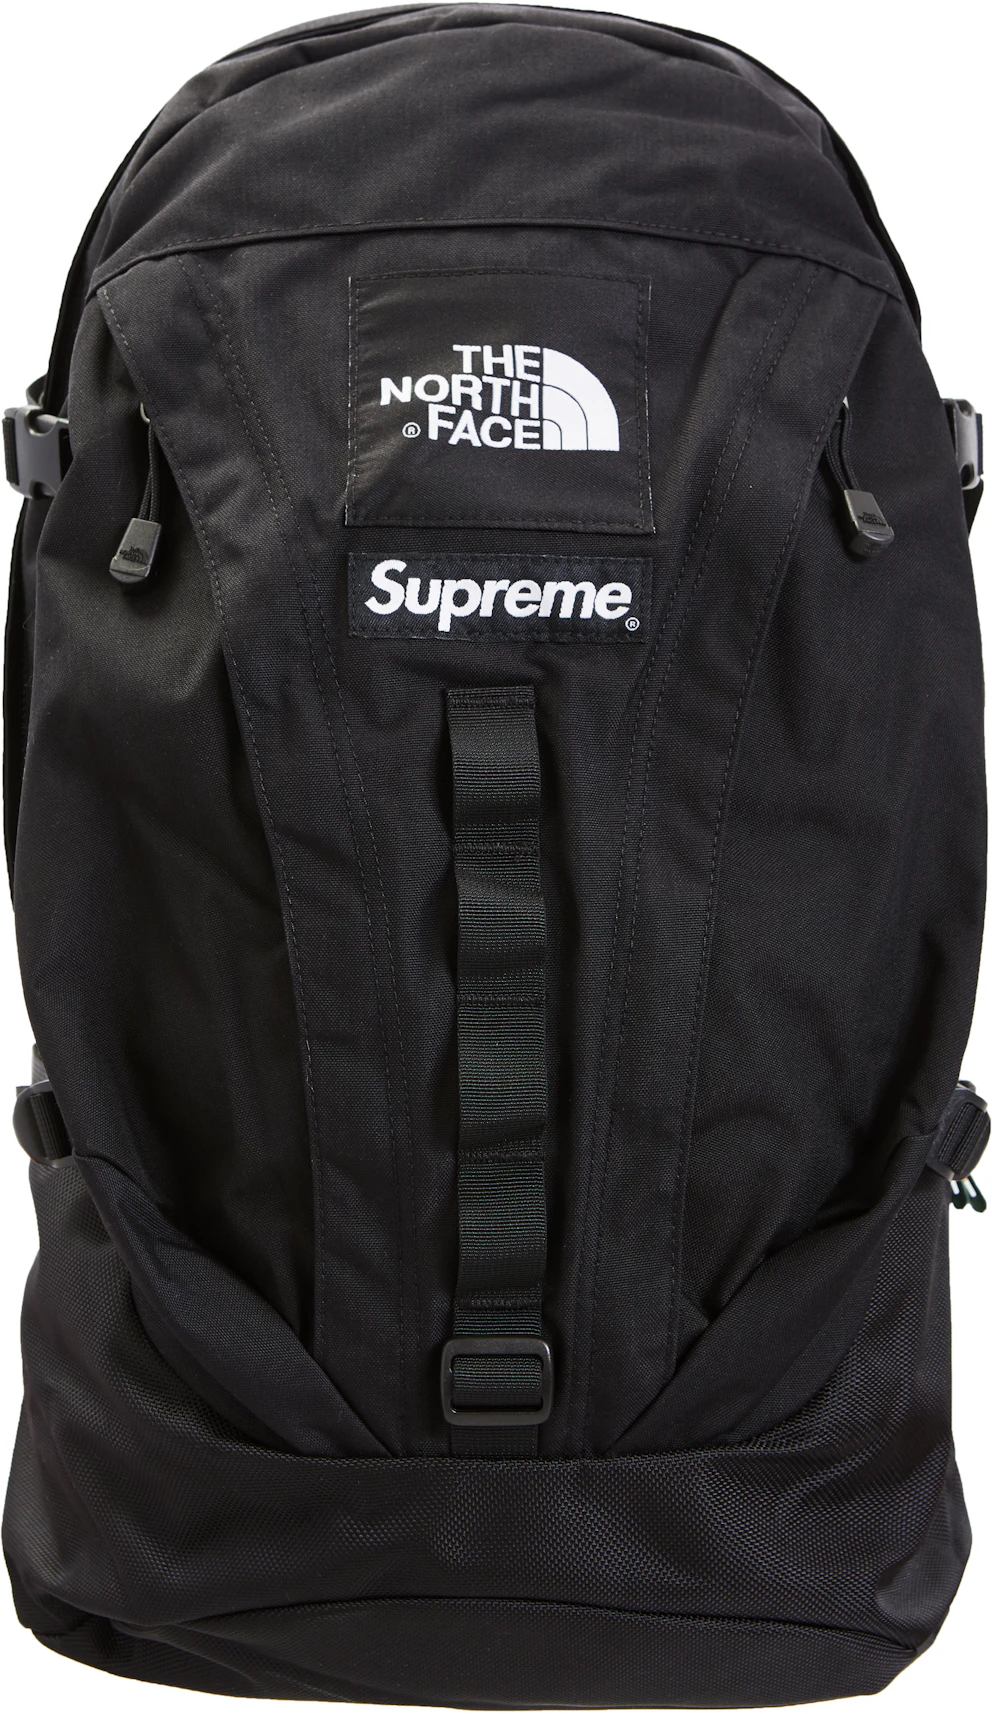 Supreme The North Face Expedition Backpack Black Fw18 Us